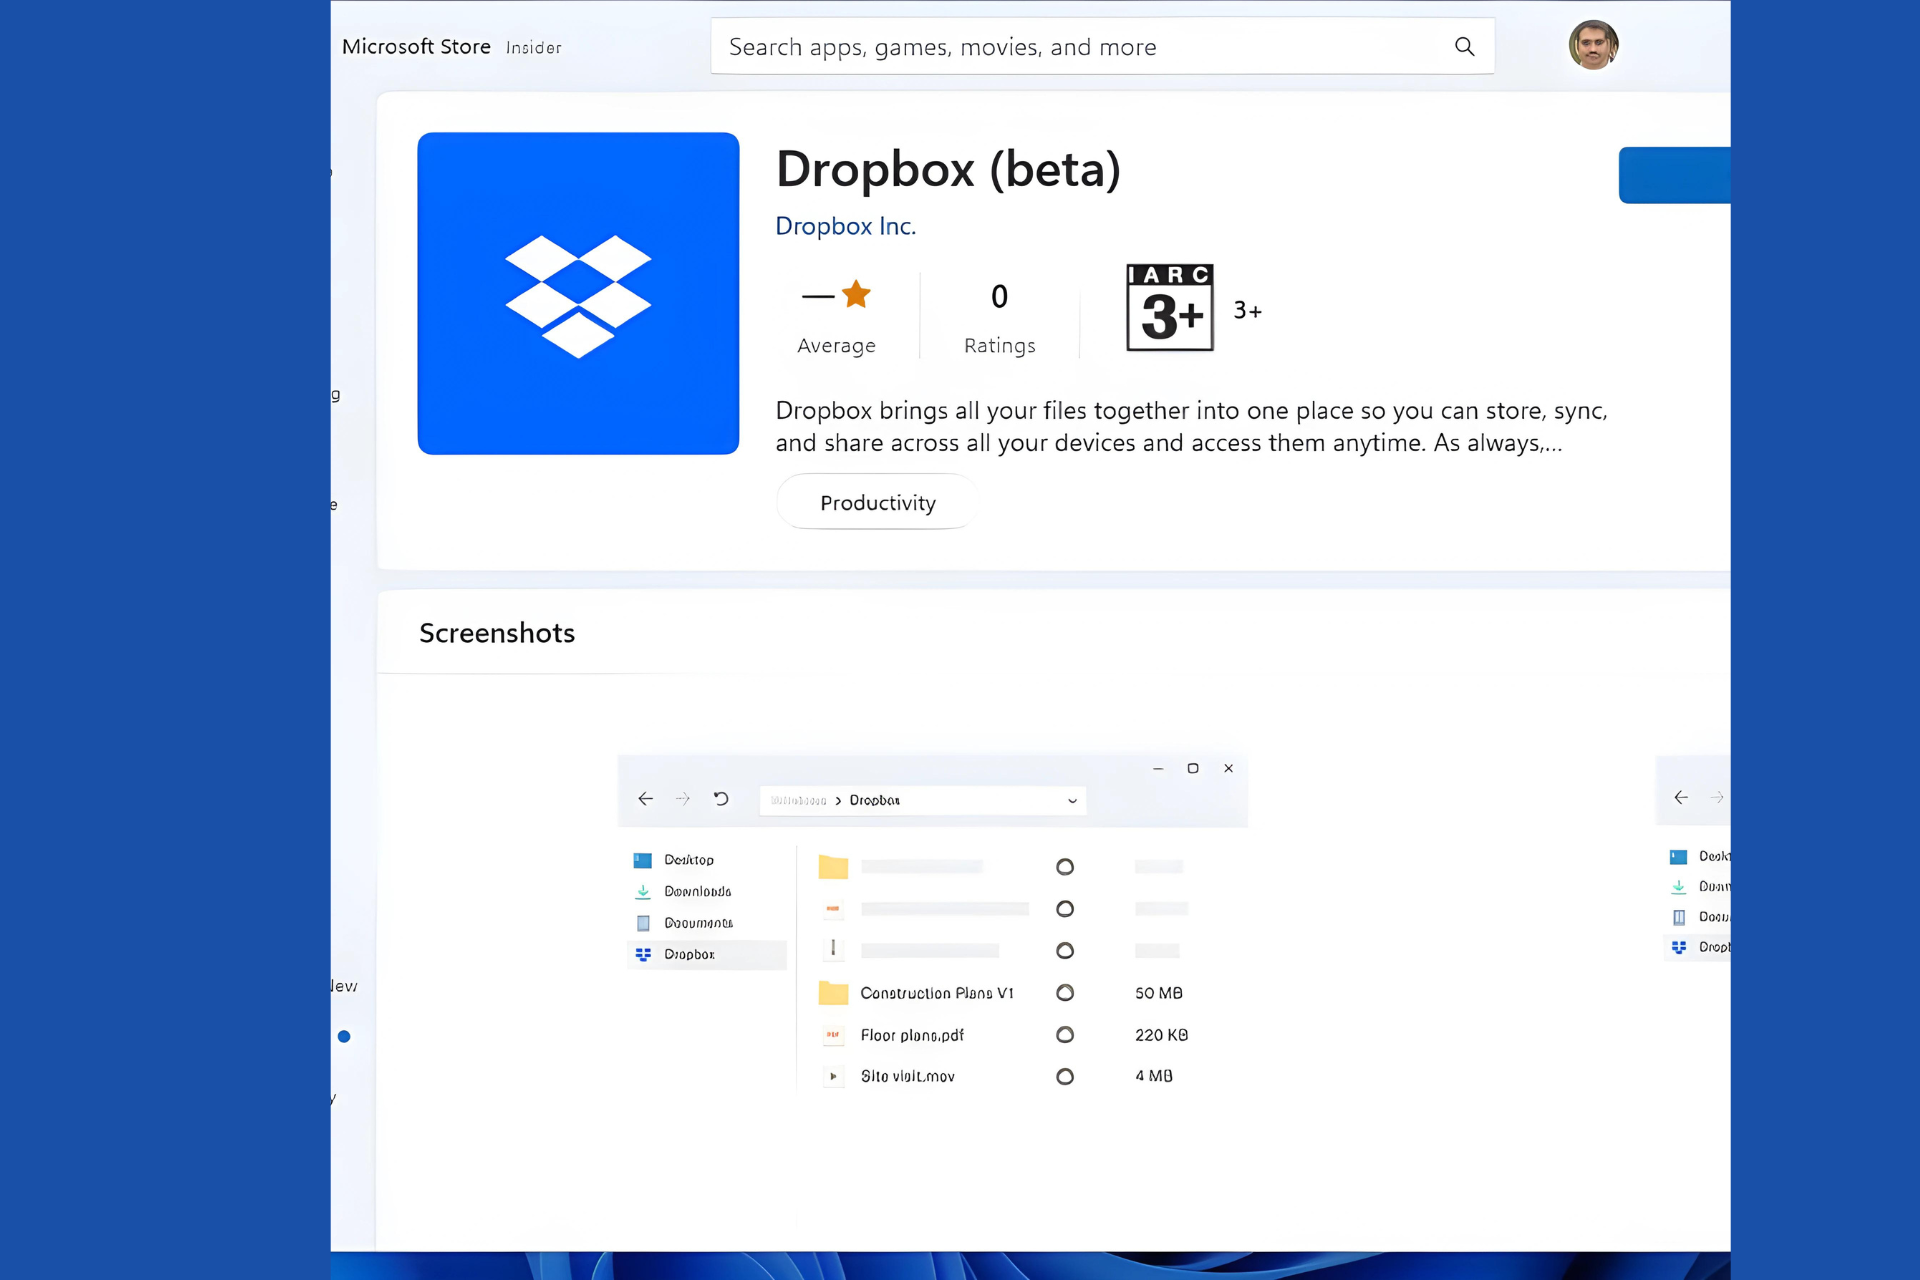 The new Dropbox App, currently in beta, comes to the Microsoft Store, providing access via File Explorer and the Taskbar